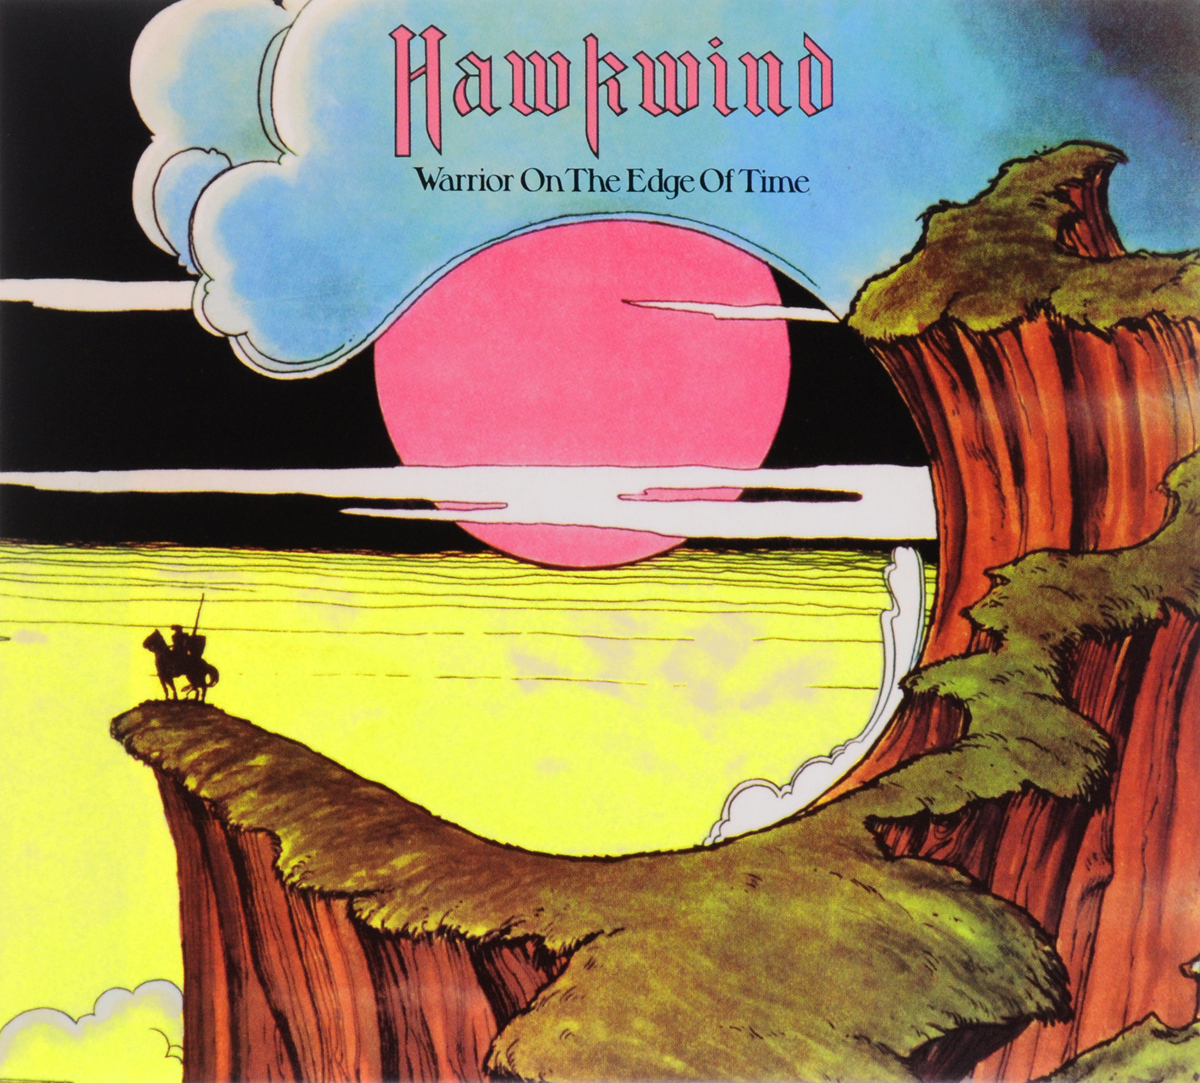 Hawkwind. Warrior On The Edge Of Time